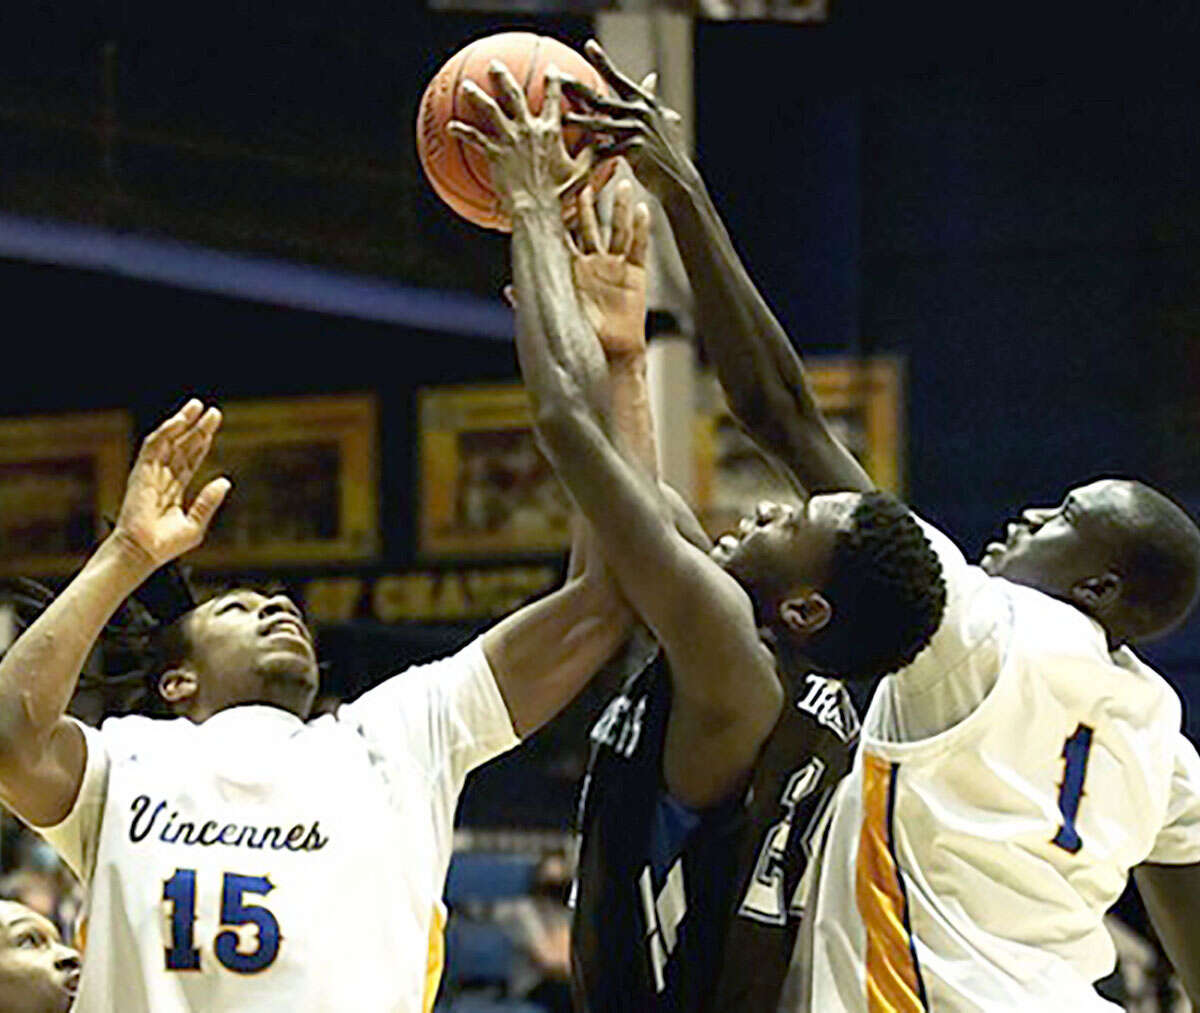 La'Terion White of Lewis and Clark, center, battles for a rebound with Vincennes' Darrius Davis (15) and Thow James Biehl Saturday night in Vincennes, Ind.